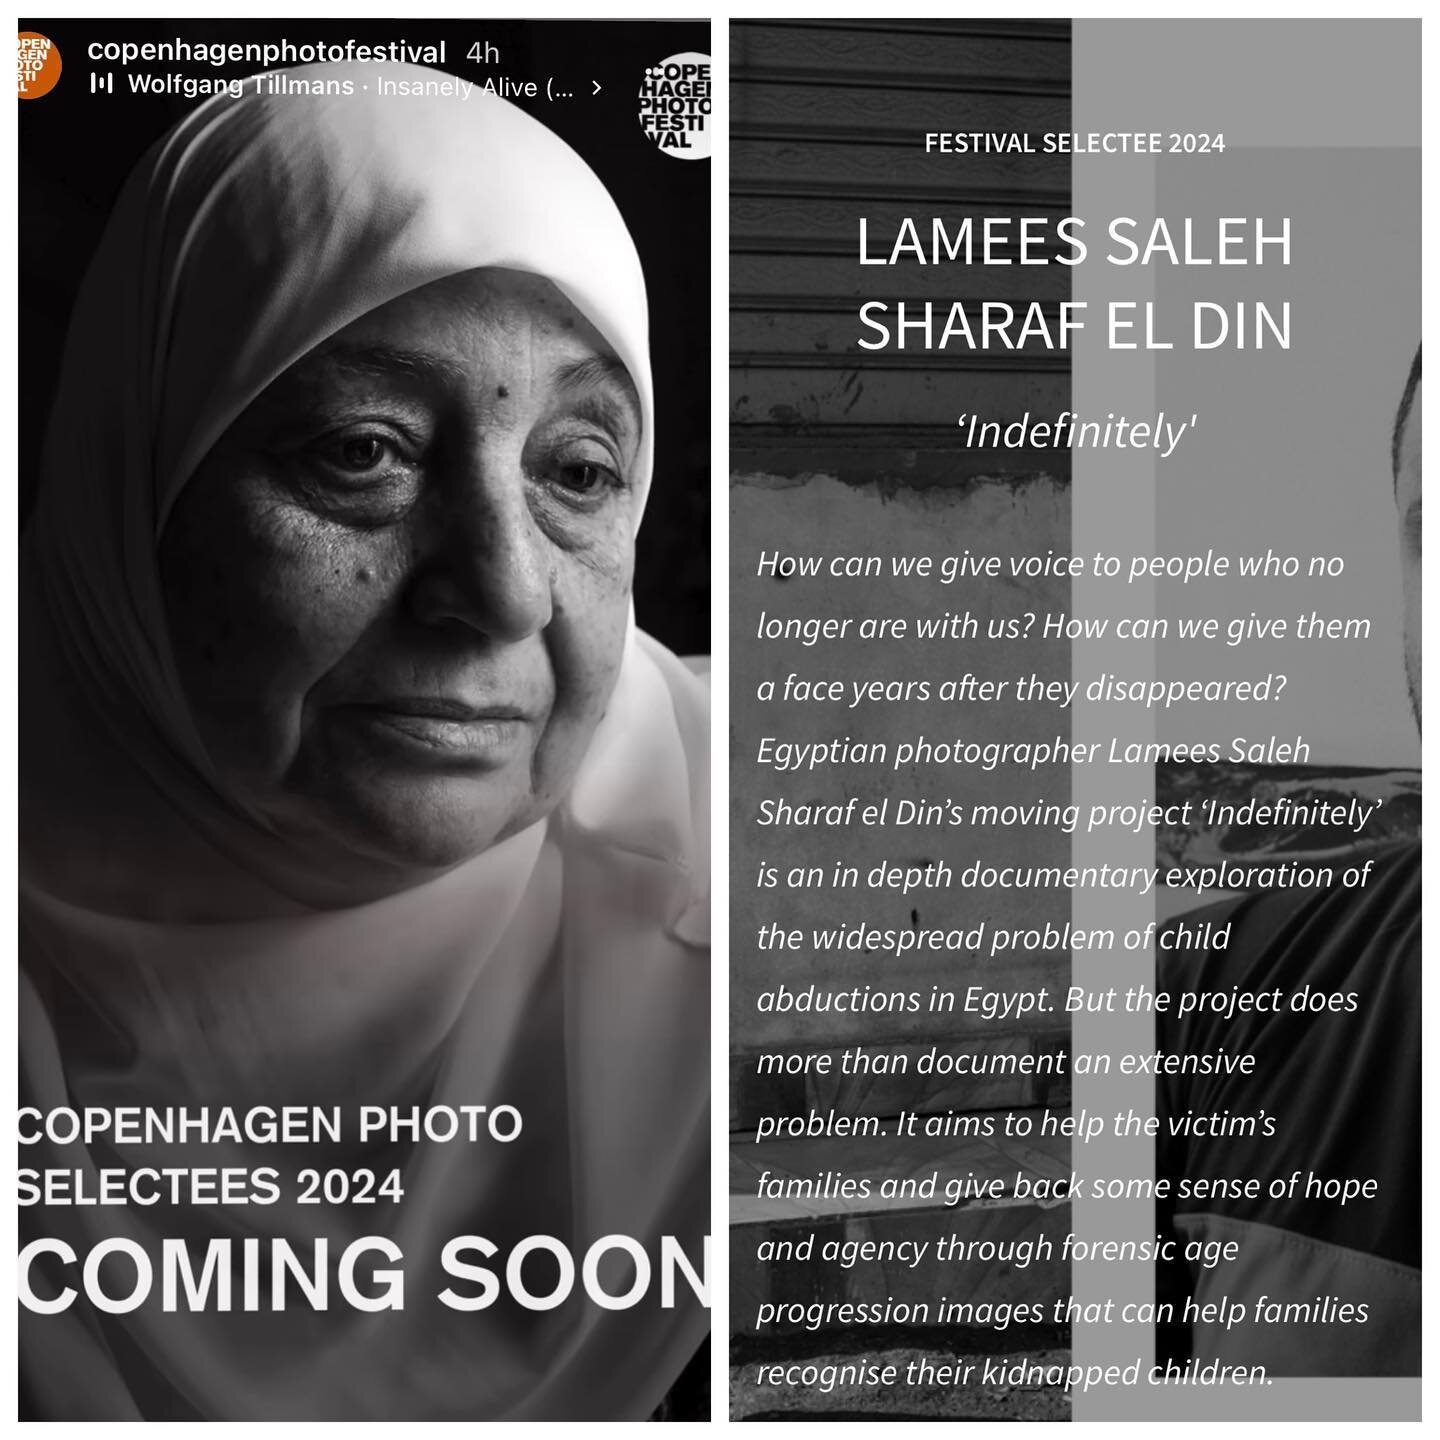 I'm incredibly excited to be selected to be part of @copenhagenphotofestival 2024 with my ongoing long-term project Indefinitely, along with incredible photographers from all around the world. Copenhagen Photo Festival is the largest photo festival i